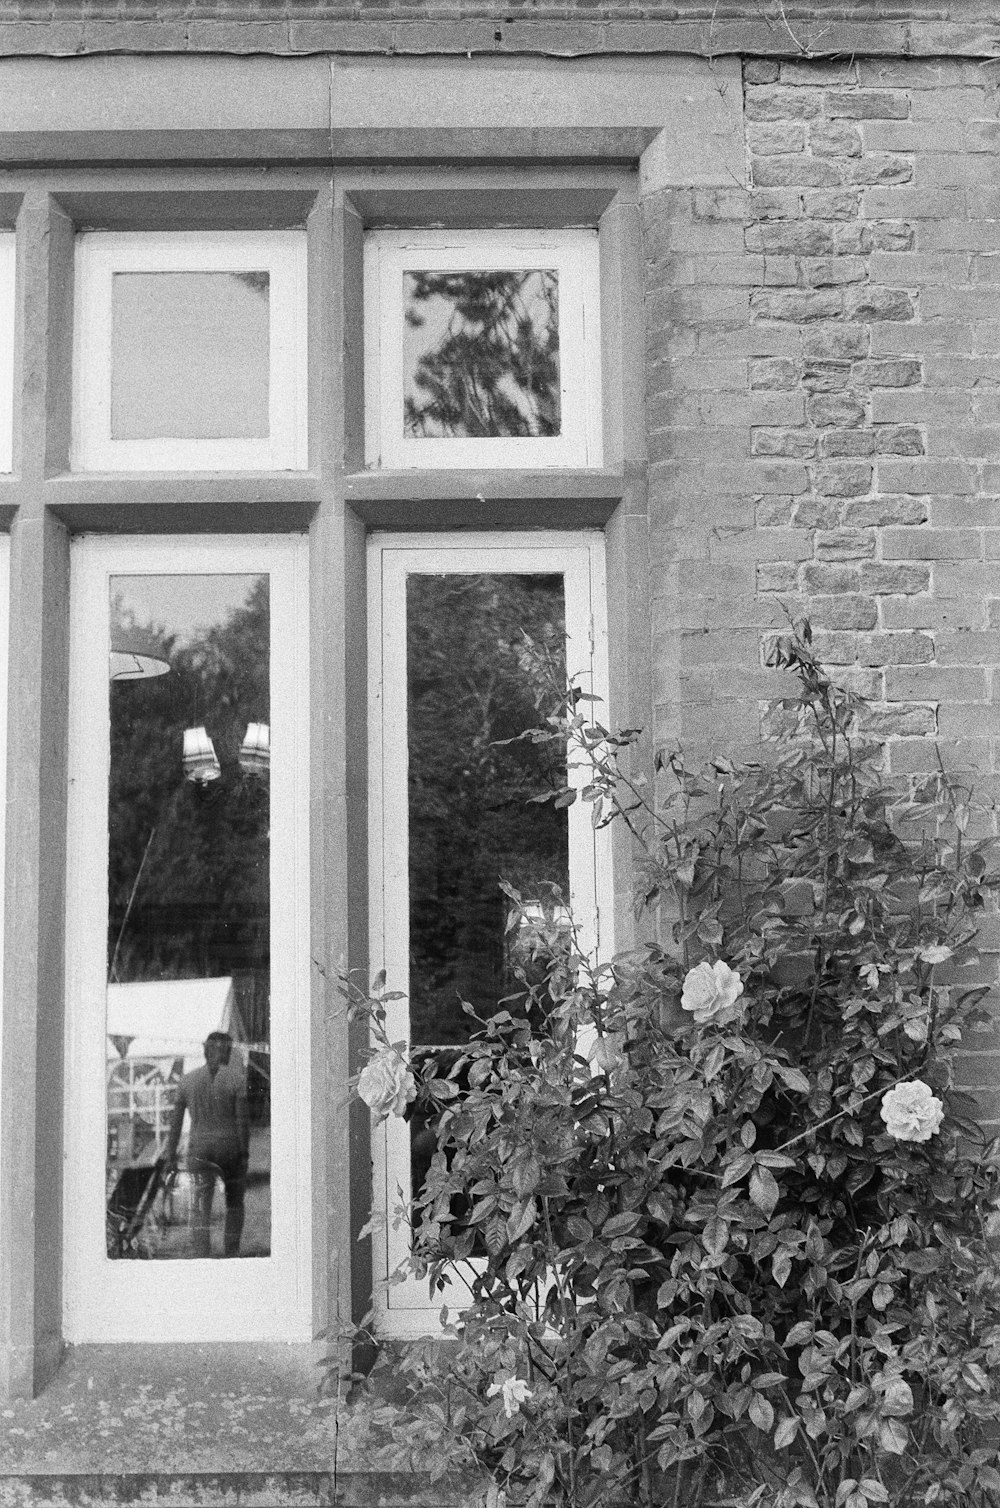 a black and white photo of a person looking out a window